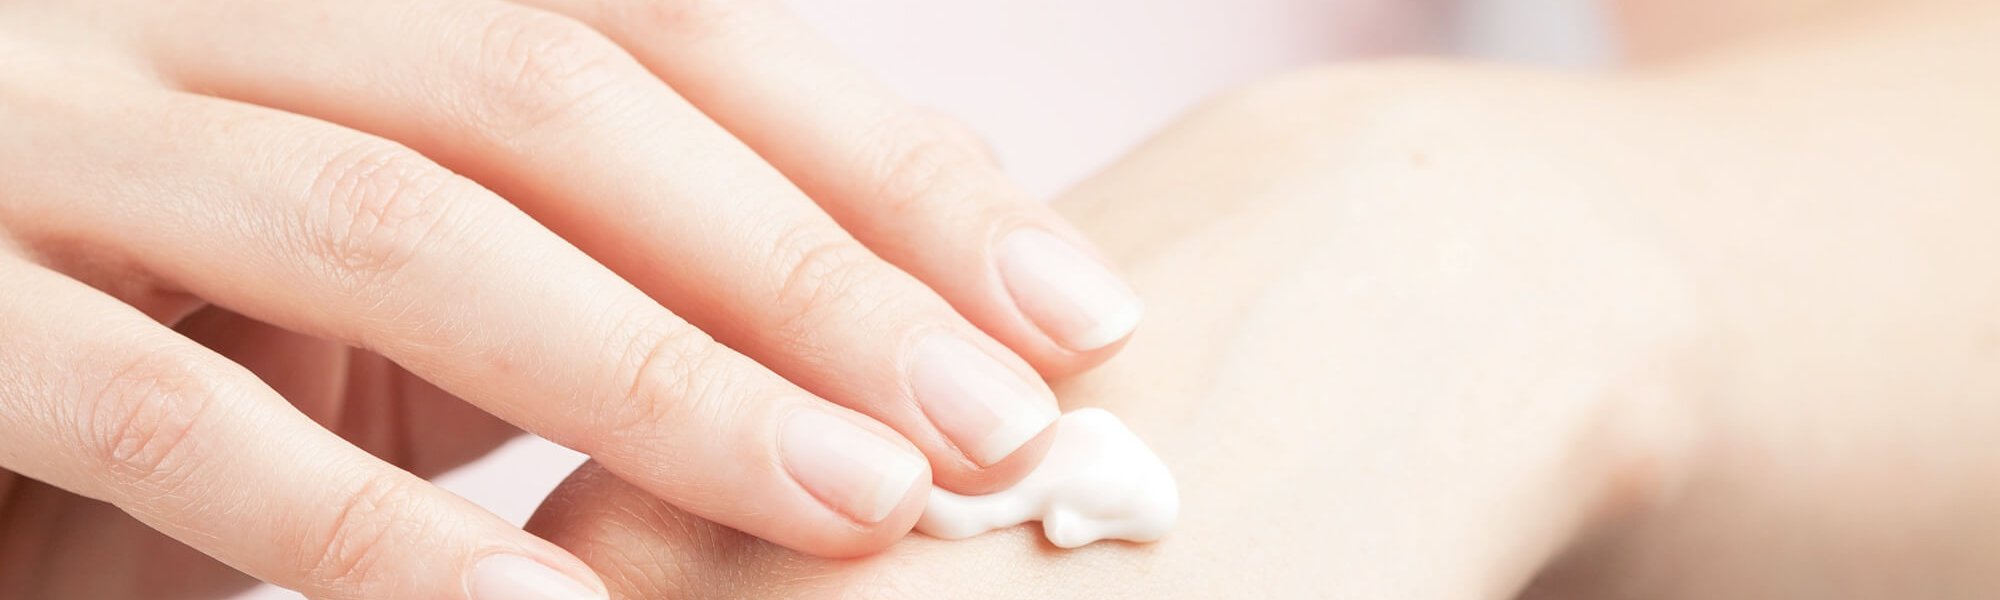 Pamper Your Mitts With These Eight Homemade Hand Treatments Hero